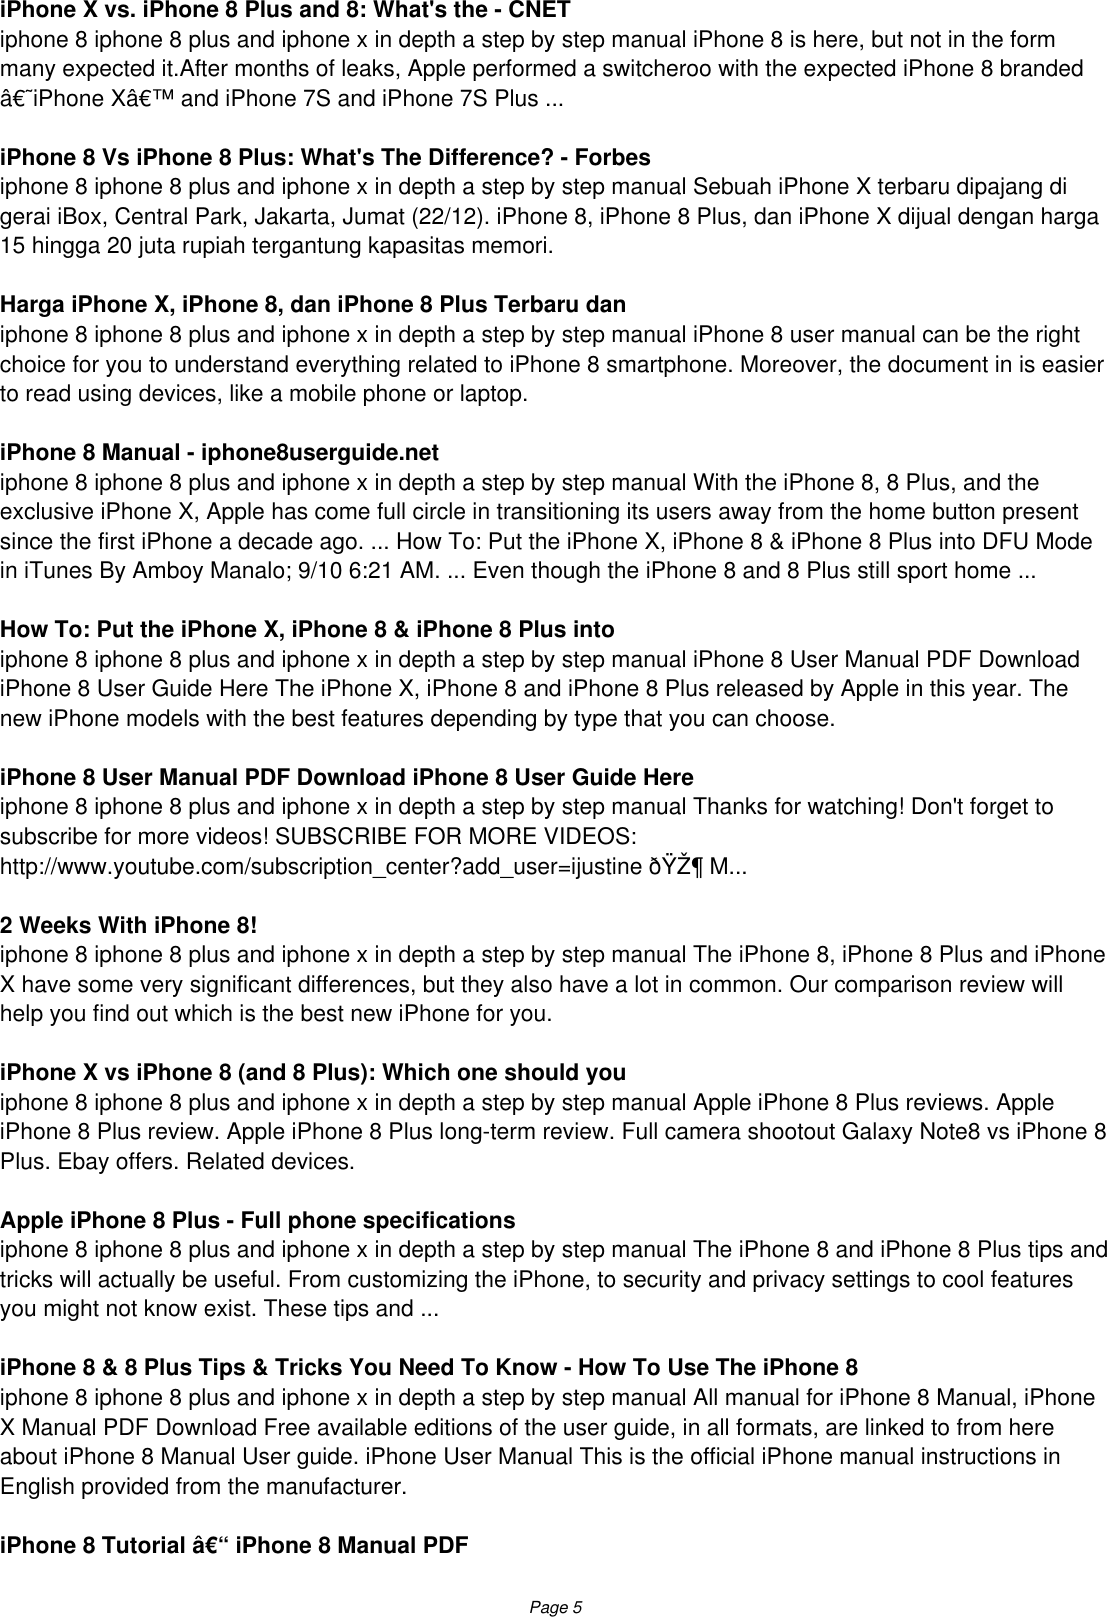 Page 5 of 9 - Iphone 8 Plus And X In Depth A Step By Manual